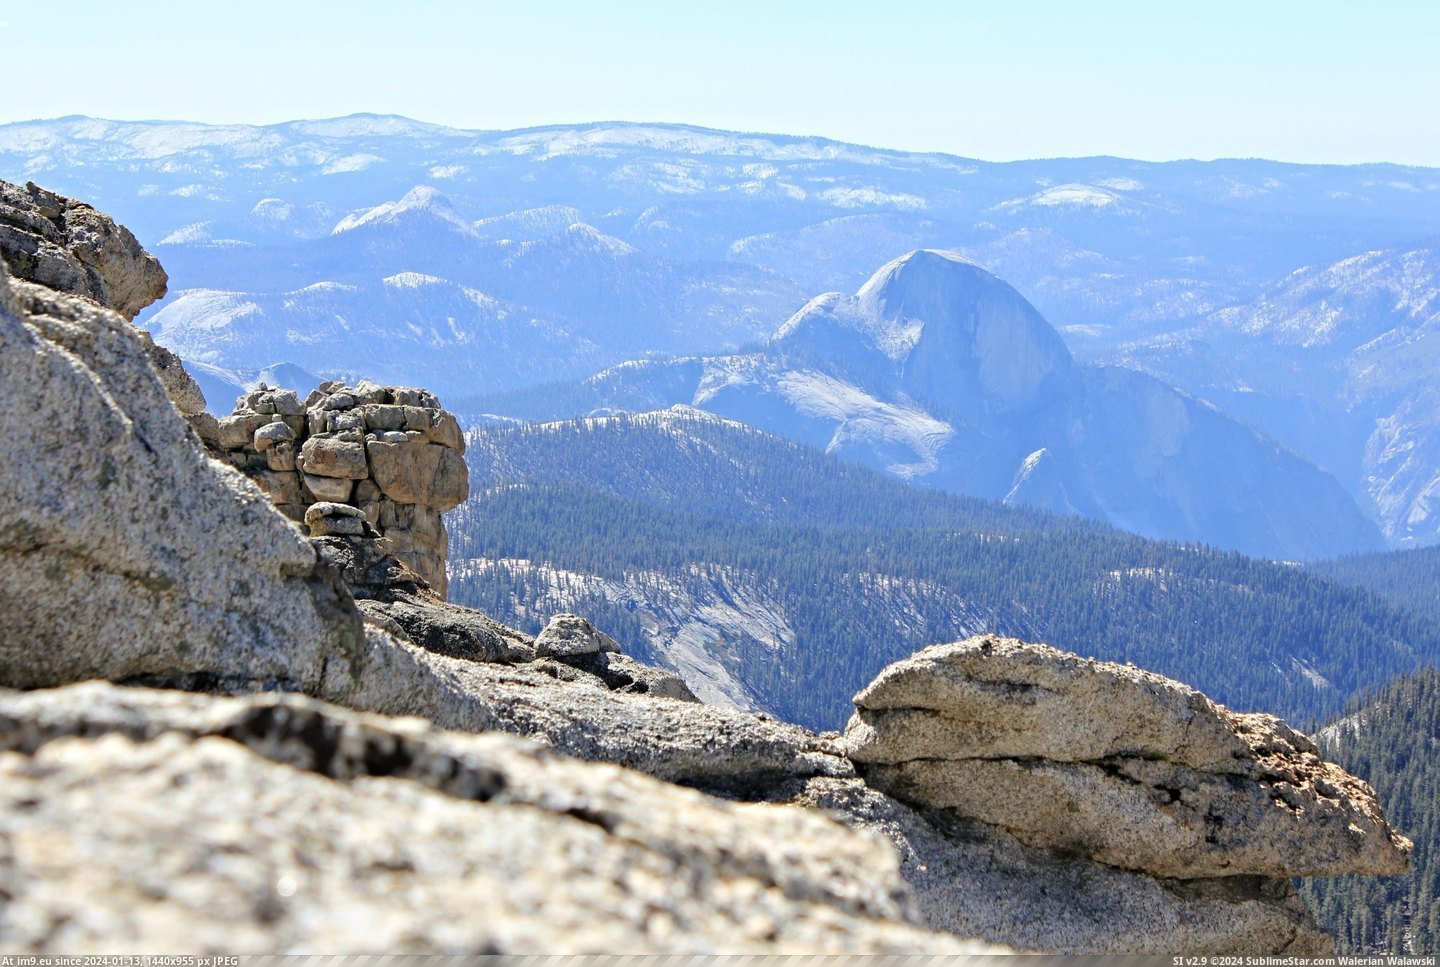 #Feet #Yosemite #Dome #Degree #Providing #Mount #Panoramic [Earthporn] 2,000 feet above Half Dome is towering Mount Hoffman, providing a 360 degree panoramic view of Yosemite and the Sier Pic. (Image of album My r/EARTHPORN favs))